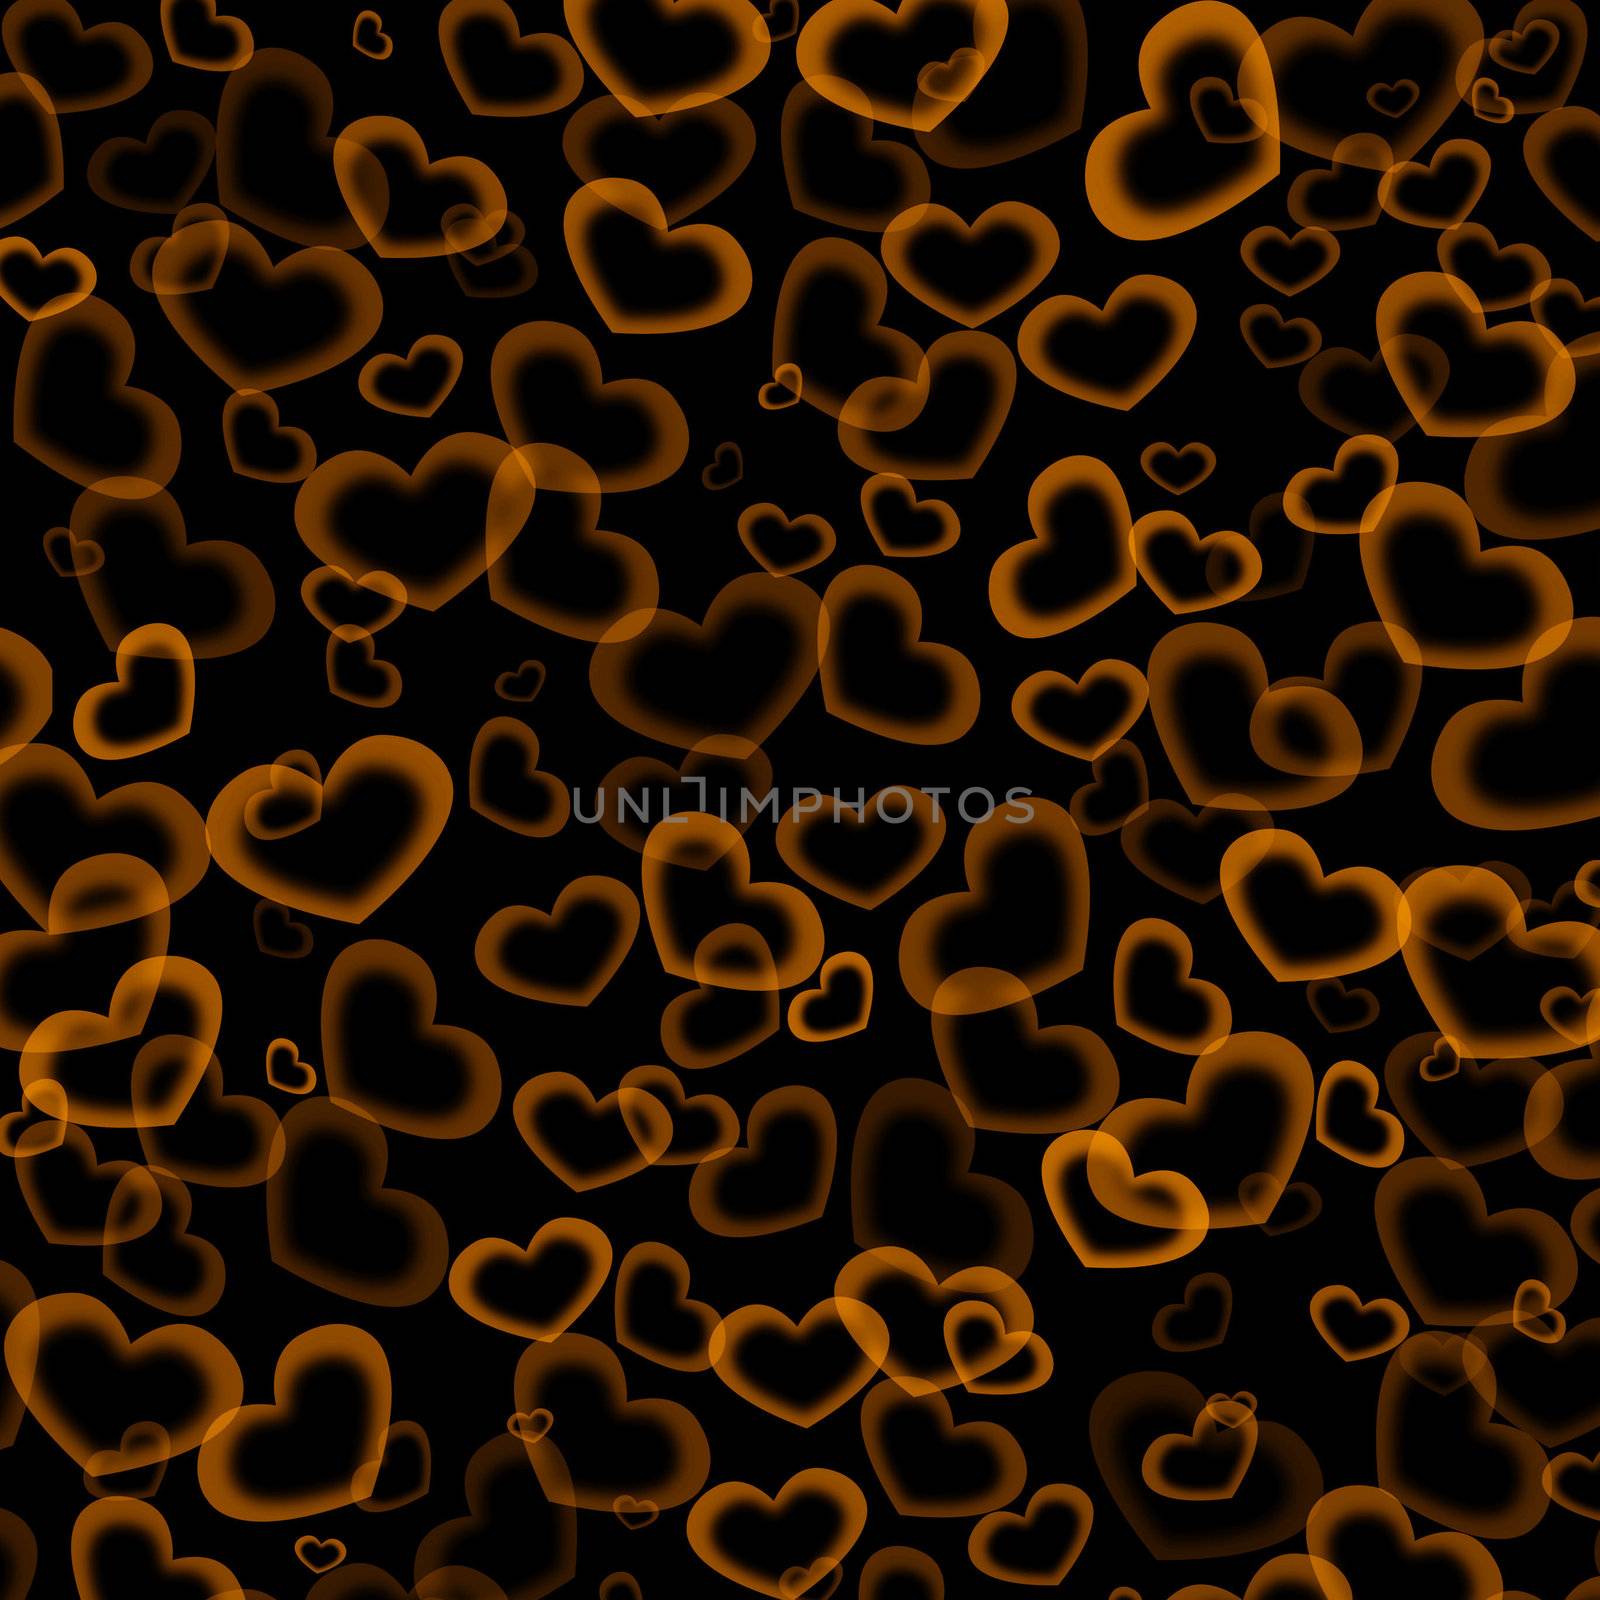 It is a lot of hearts on a black background